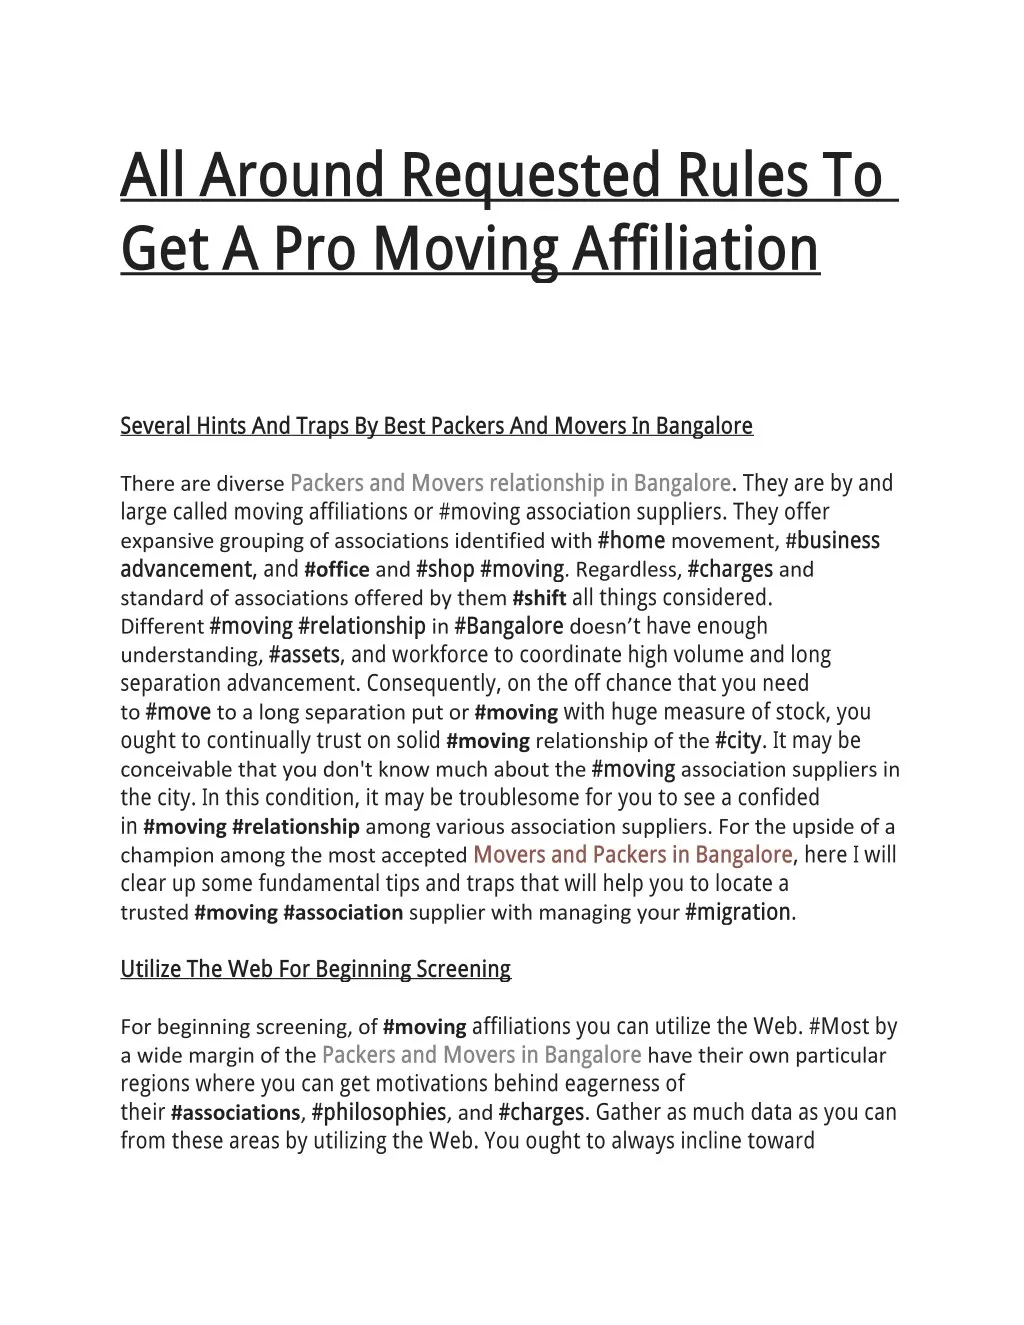 all around requested rules to get a pro moving